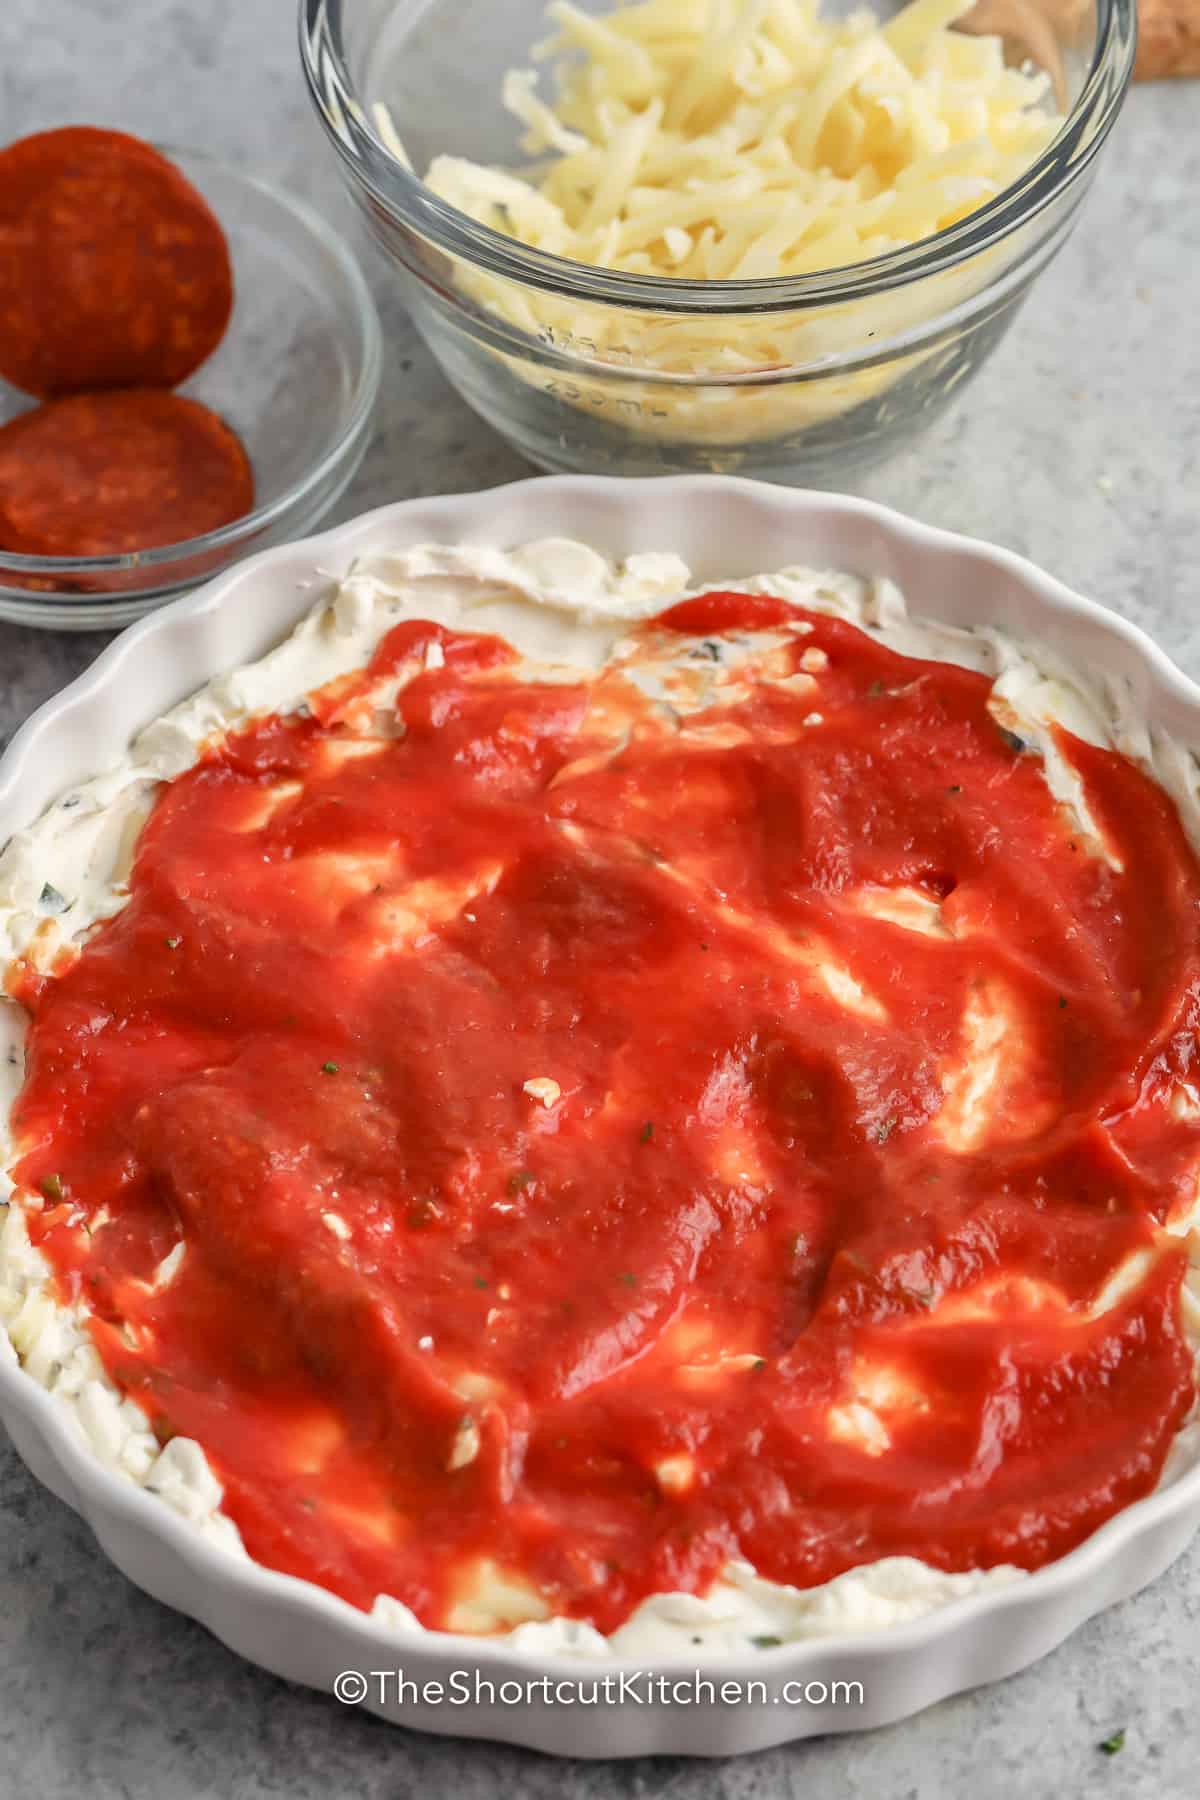 Cream cheese mixture topped with pizza sauce in a serving dish